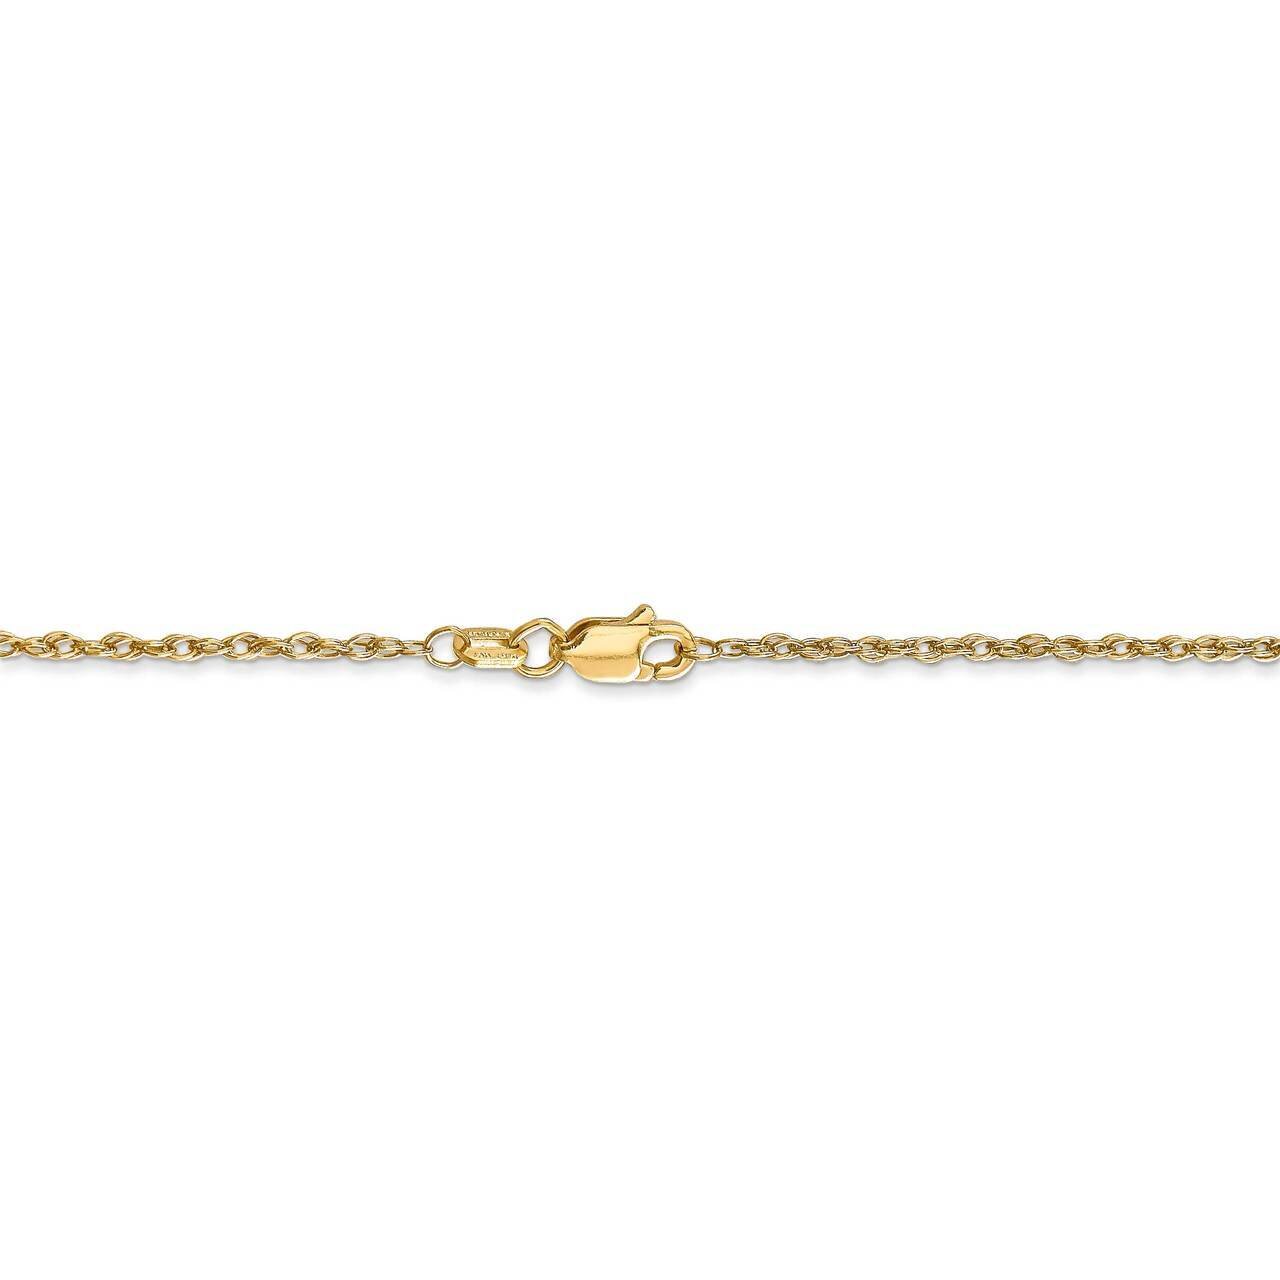 30 Inch 1.3mm Heavy-Baby Rope Chain 14k Yellow Gold PEN6-30